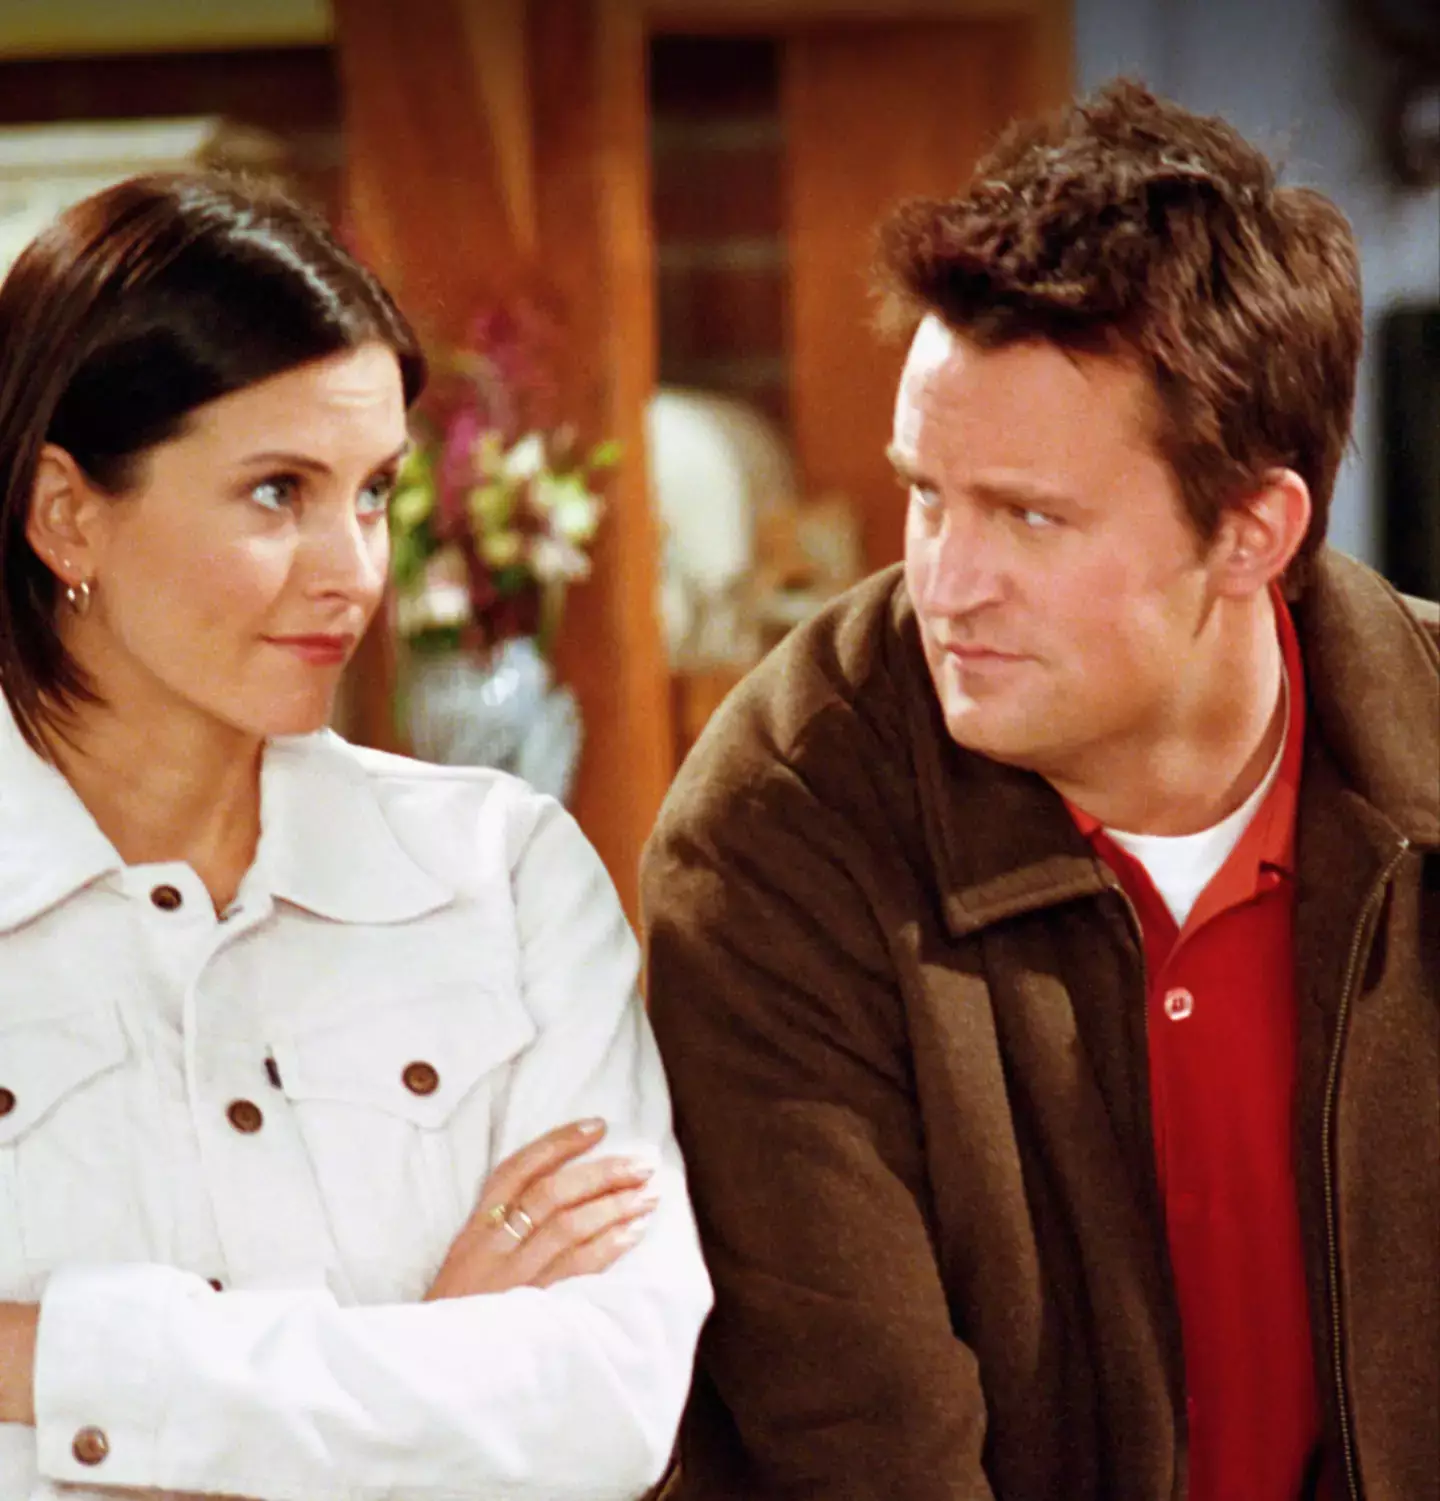 The Monica Geller actress claims the late star still 'visits' her. (NBC)